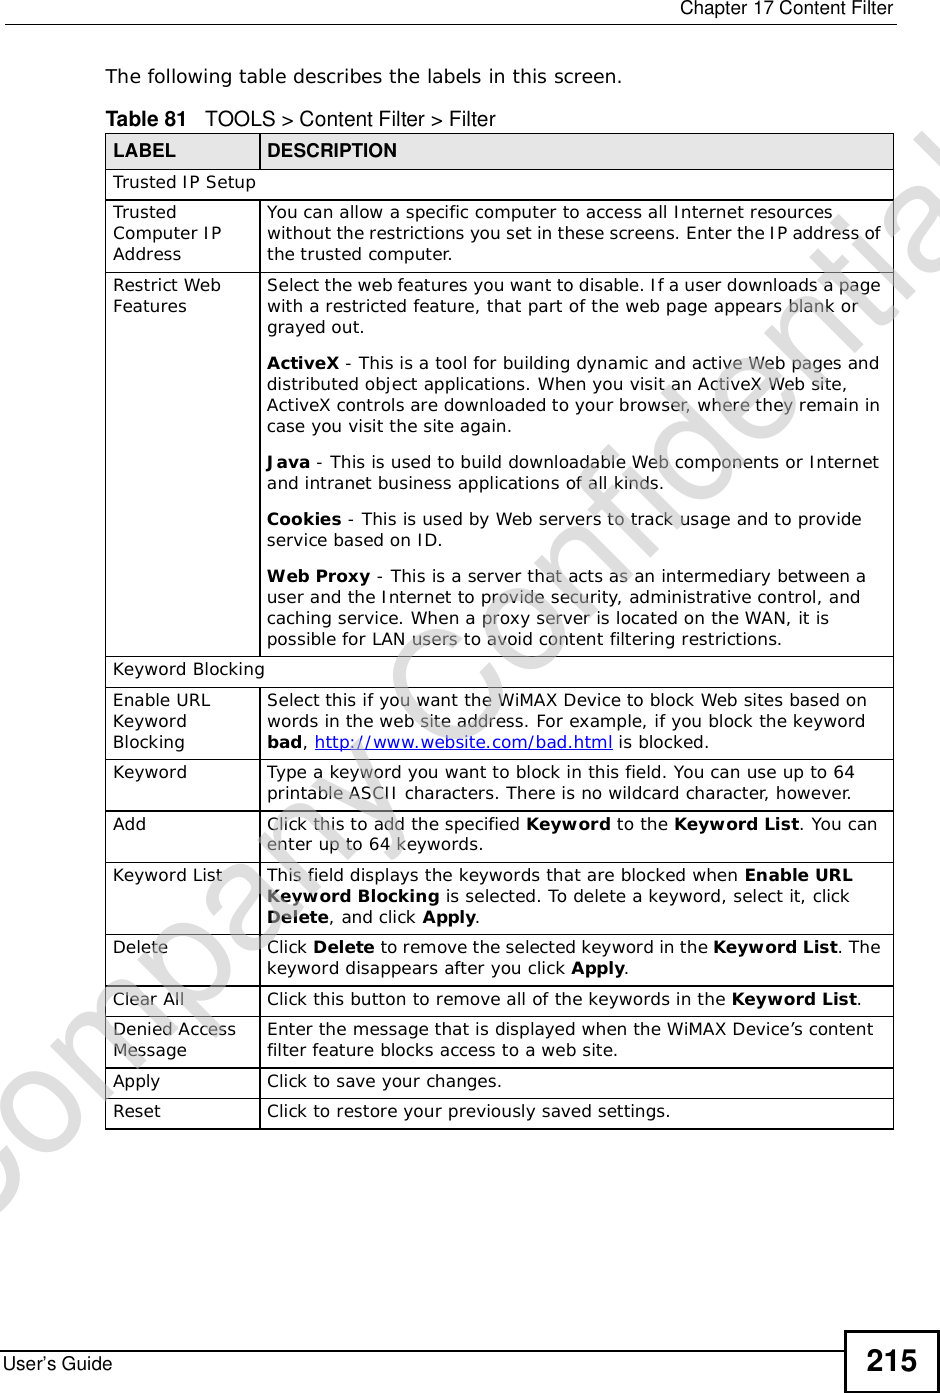  Chapter 17Content FilterUser’s Guide 215The following table describes the labels in this screen.  Table 81   TOOLS &gt; Content Filter &gt; FilterLABEL DESCRIPTIONTrusted IP SetupTrusted Computer IP AddressYou can allow a specific computer to access all Internet resources without the restrictions you set in these screens. Enter the IP address of the trusted computer.Restrict Web Features Select the web features you want to disable. If a user downloads a page with a restricted feature, that part of the web page appears blank or grayed out.ActiveX - This is a tool for building dynamic and active Web pages and distributed object applications. When you visit an ActiveX Web site, ActiveX controls are downloaded to your browser, where they remain in case you visit the site again.Java - This is used to build downloadable Web components or Internet and intranet business applications of all kinds.Cookies - This is used by Web servers to track usage and to provide service based on ID.Web Proxy - This is a server that acts as an intermediary between a user and the Internet to provide security, administrative control, and caching service. When a proxy server is located on the WAN, it is possible for LAN users to avoid content filtering restrictions.Keyword BlockingEnable URL Keyword BlockingSelect this if you want the WiMAX Device to block Web sites based on words in the web site address. For example, if you block the keyword bad,http://www.website.com/bad.html is blocked.Keyword Type a keyword you want to block in this field. You can use up to 64 printable ASCII characters. There is no wildcard character, however.Add Click this to add the specified Keyword to the Keyword List. You can enter up to 64 keywords.Keyword List This field displays the keywords that are blocked when Enable URL Keyword Blocking is selected. To delete a keyword, select it, click Delete, and click Apply.Delete Click Delete to remove the selected keyword in the Keyword List. The keyword disappears after you click Apply.Clear All Click this button to remove all of the keywords in the Keyword List.Denied Access Message Enter the message that is displayed when the WiMAX Device’s content filter feature blocks access to a web site.Apply Click to save your changes.Reset Click to restore your previously saved settings.Company Confidential